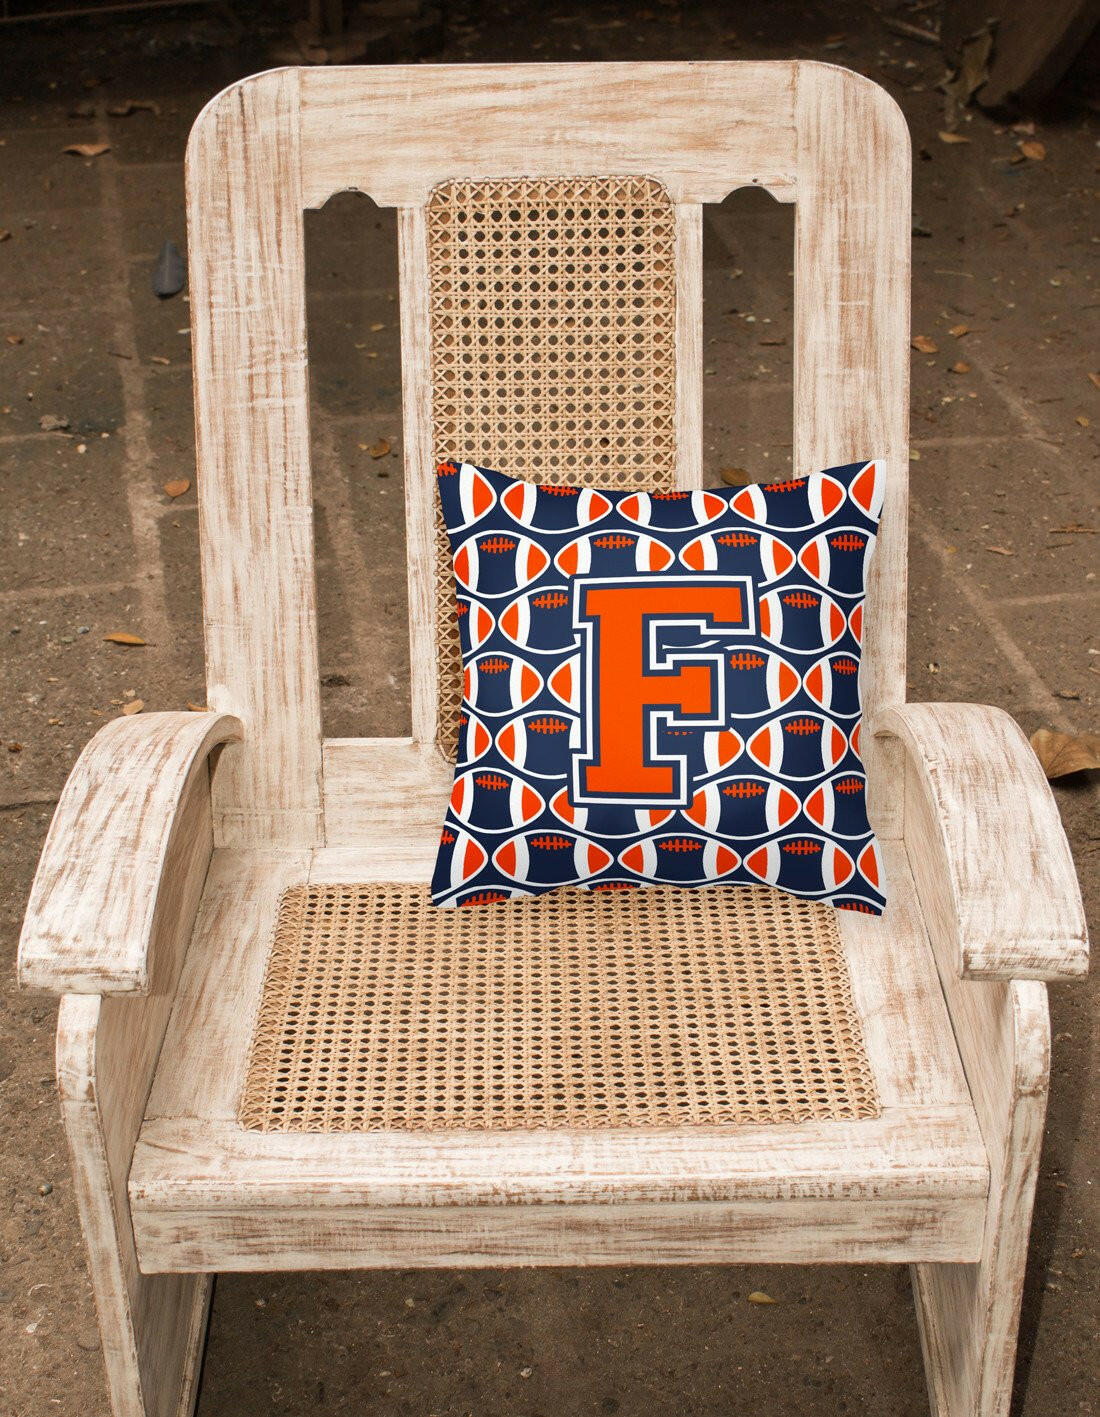 Letter F Football Orange, Blue and white Fabric Decorative Pillow CJ1066-FPW1414 by Caroline's Treasures